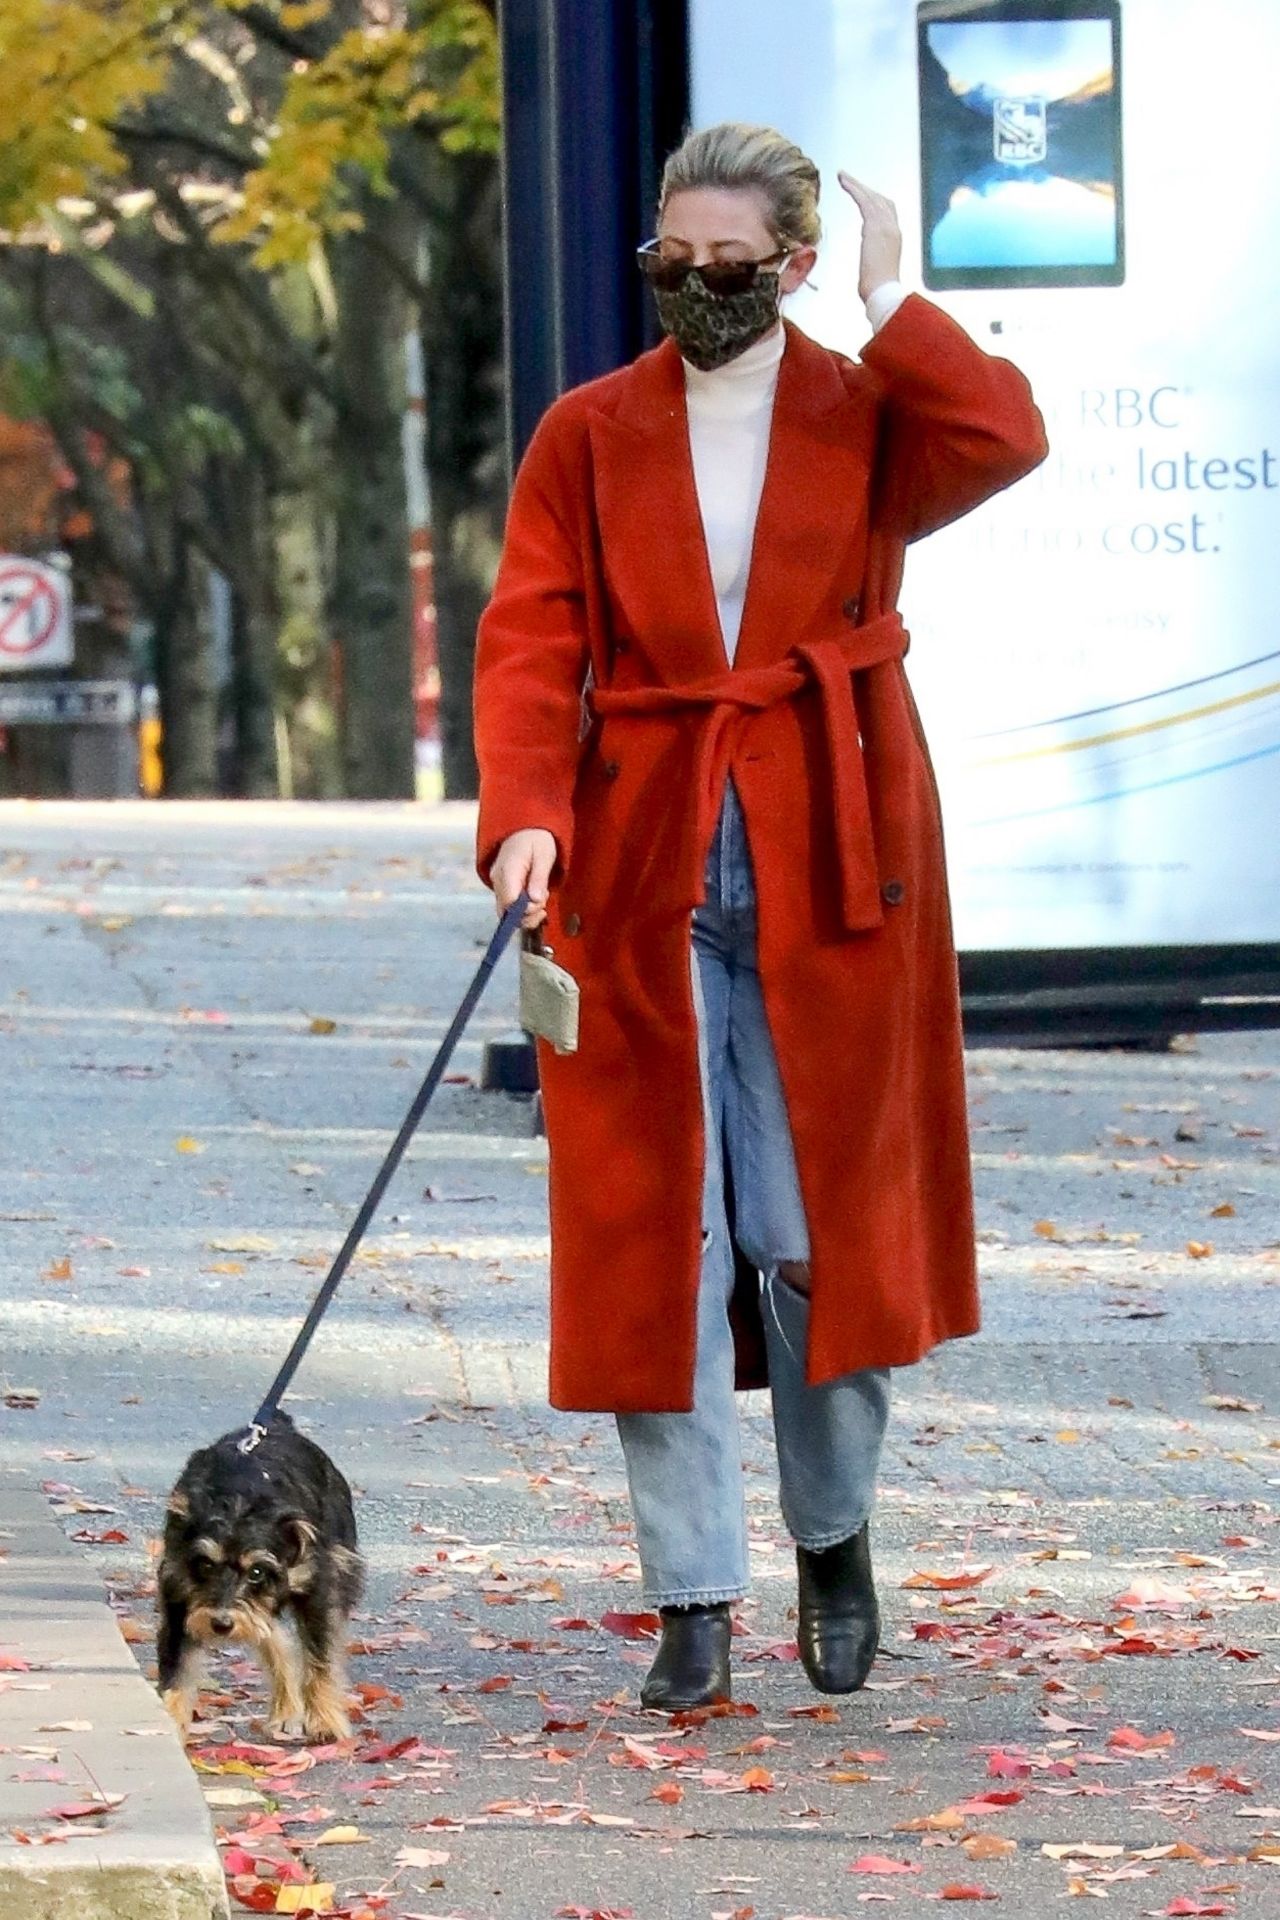 lili-reinhart-takes-her-dog-for-a-walk-in-vancouver-11-08-2020-3.jpg